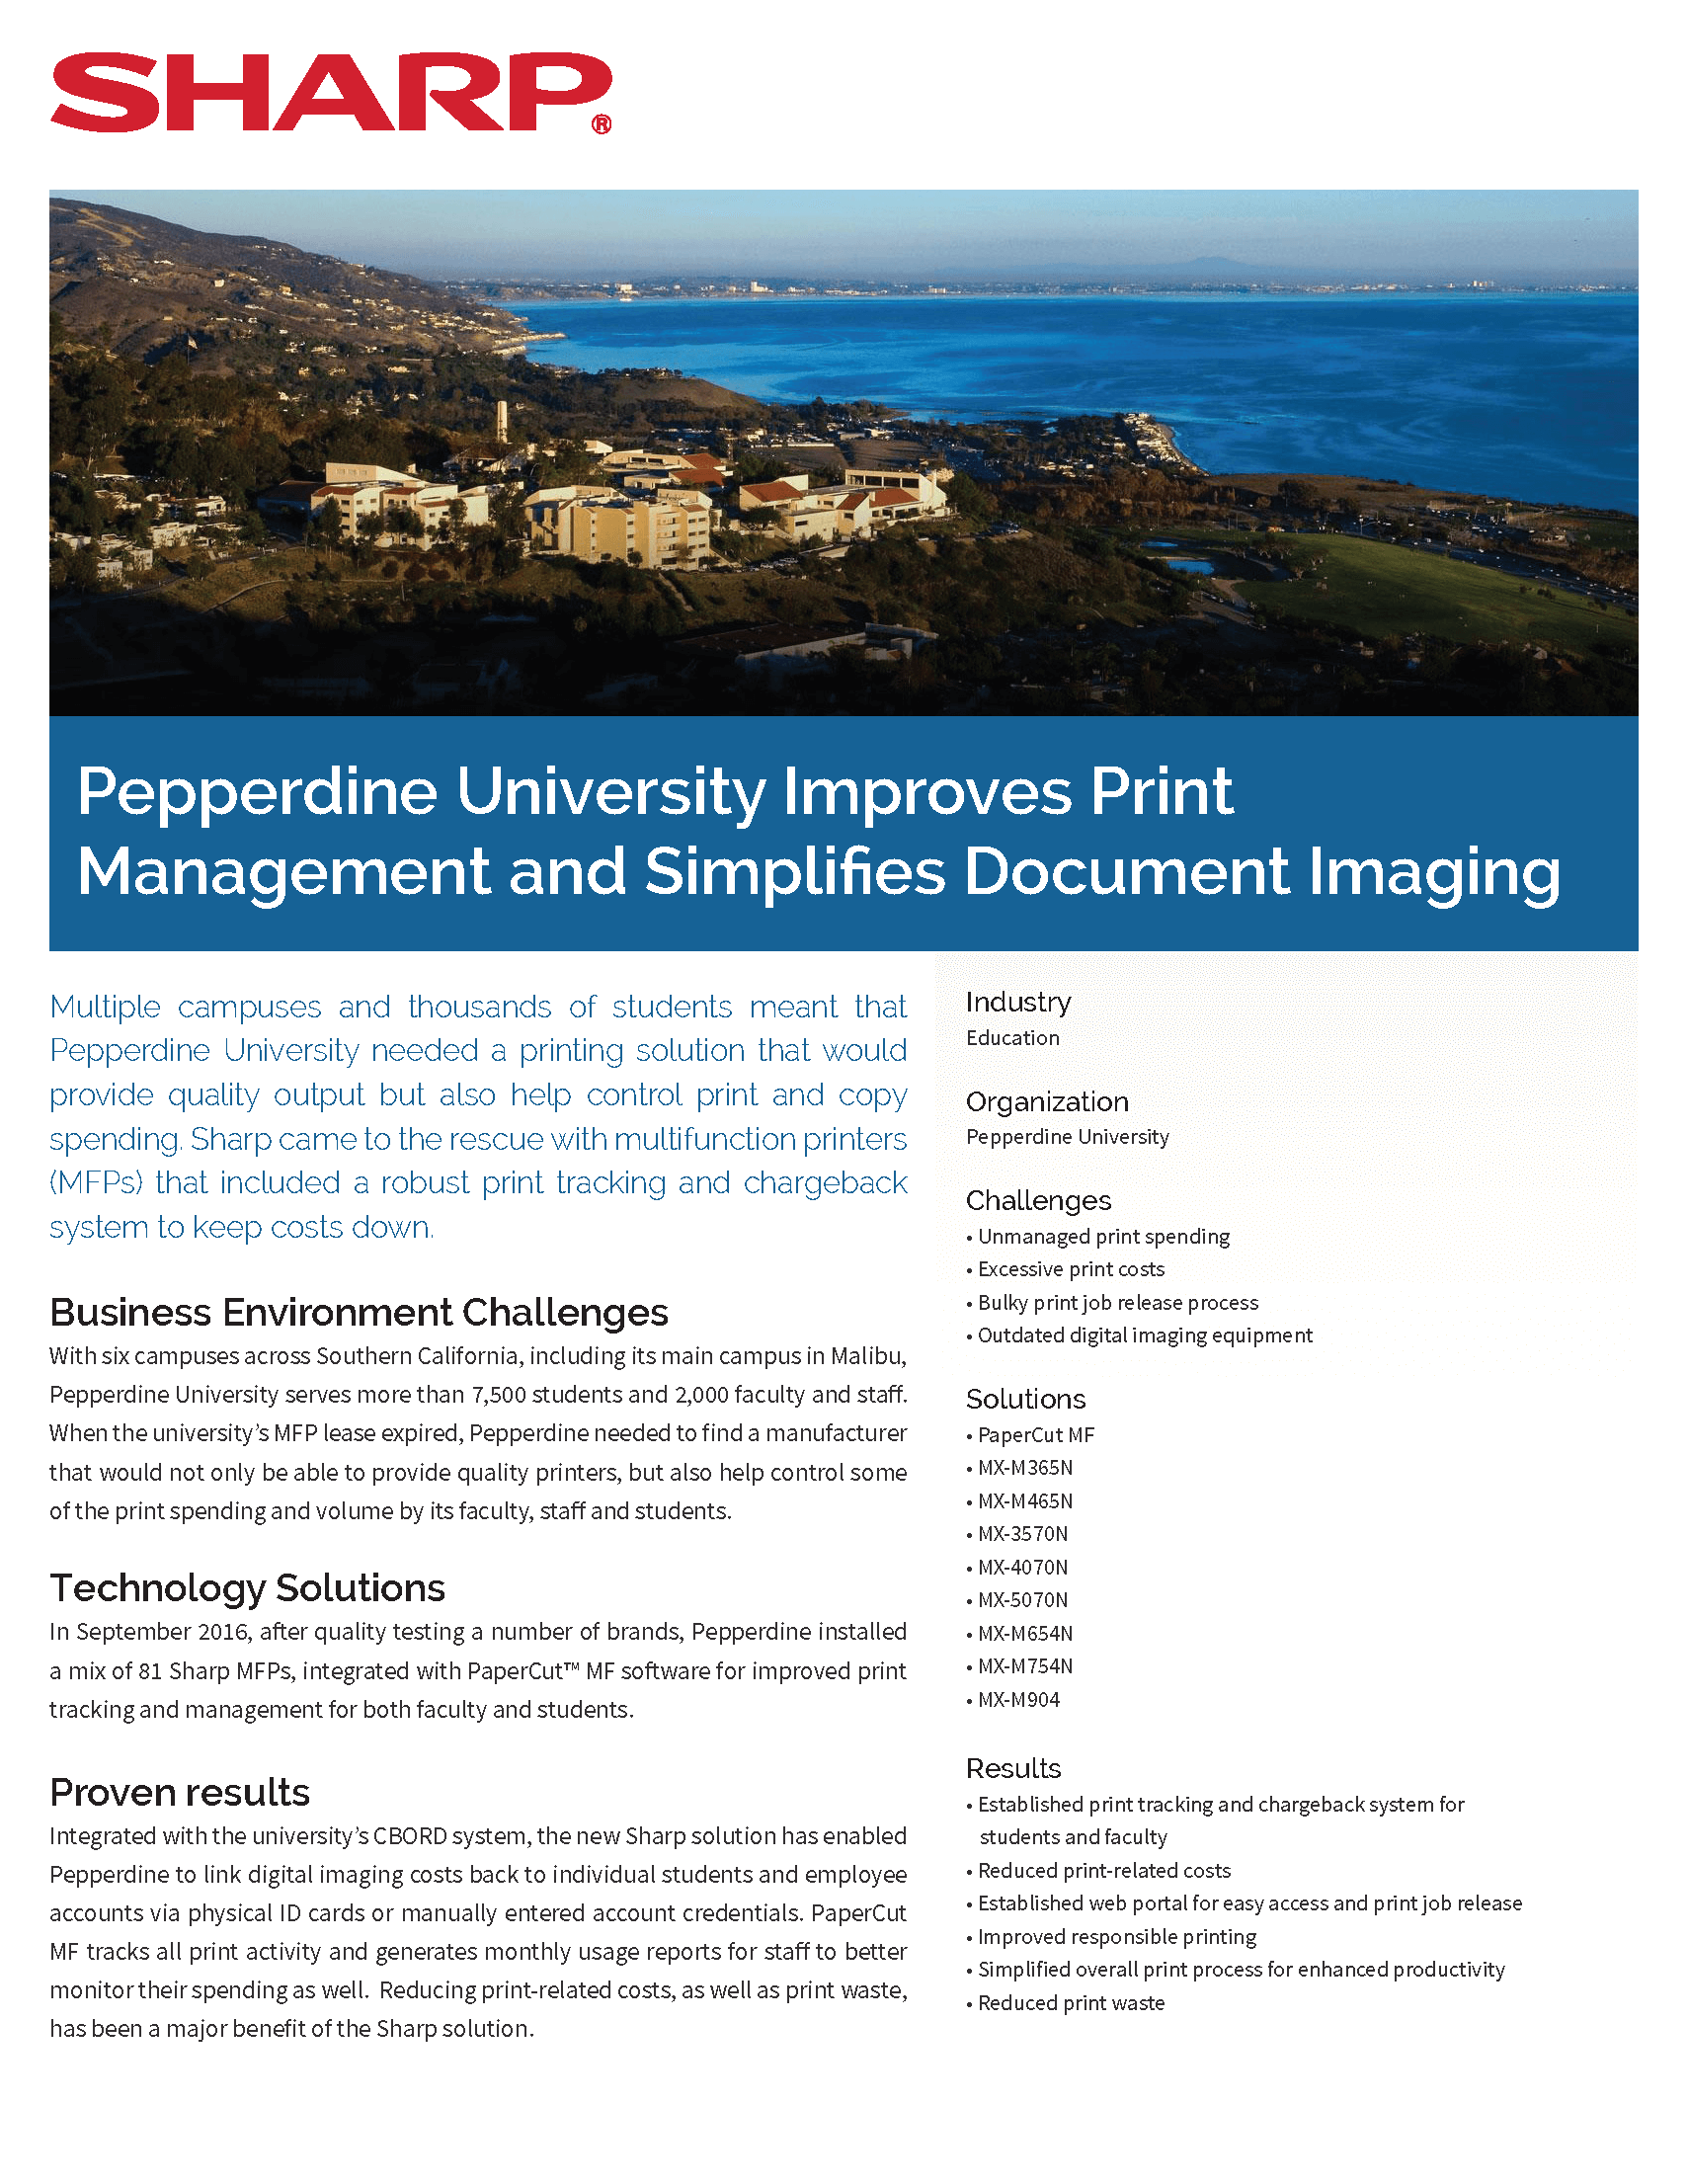 Pepperdine University simplifies printing and control of faculty/student usage